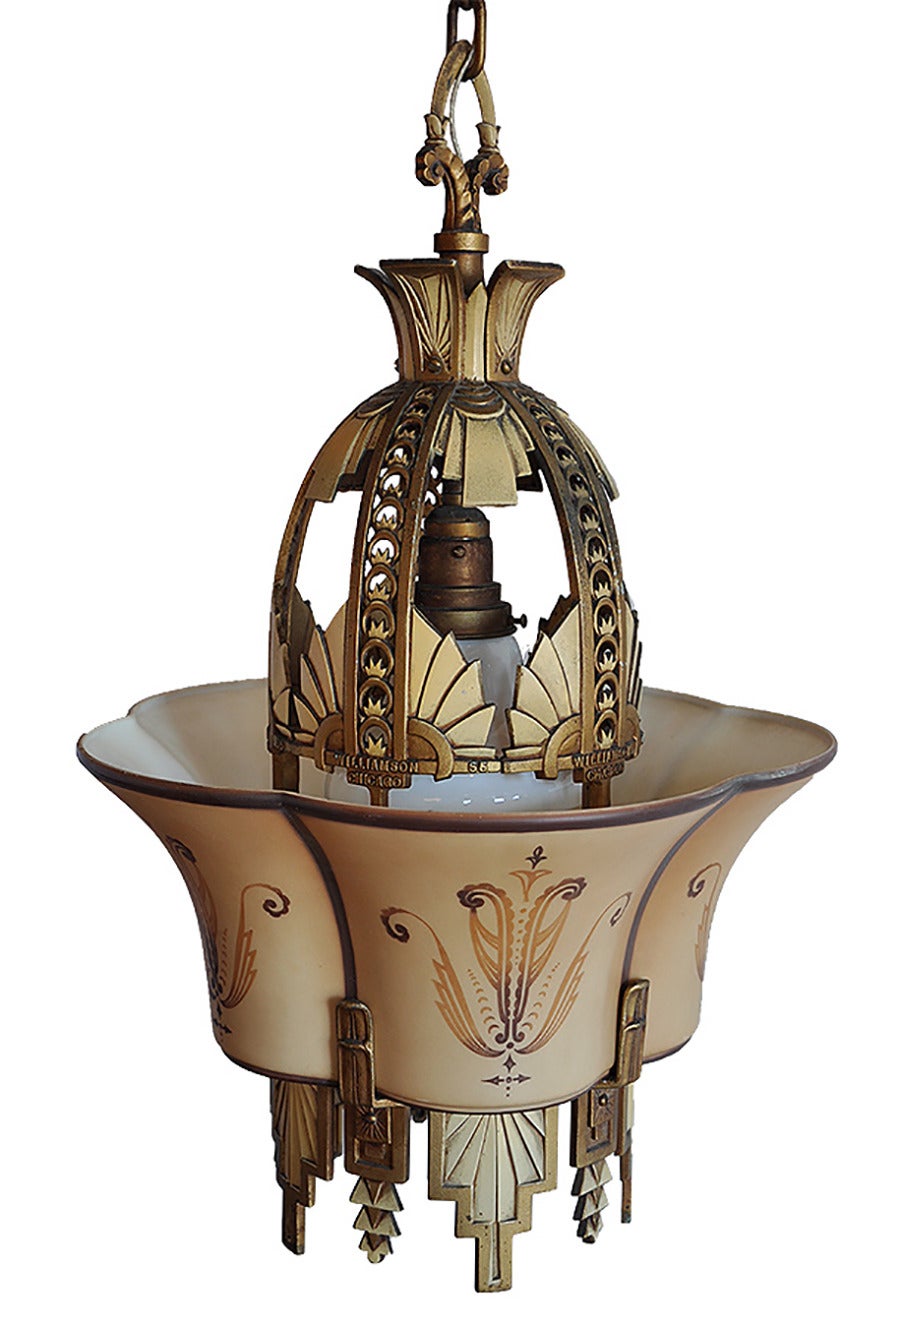 Produced from Chicago’s Premium lighting supplier in the 1930’s, this chandelier is truly rare find of antique art deco glass and a unique change in the ‘slipper shade’ design.  This fixture features one cylindrical shade rather than five separate